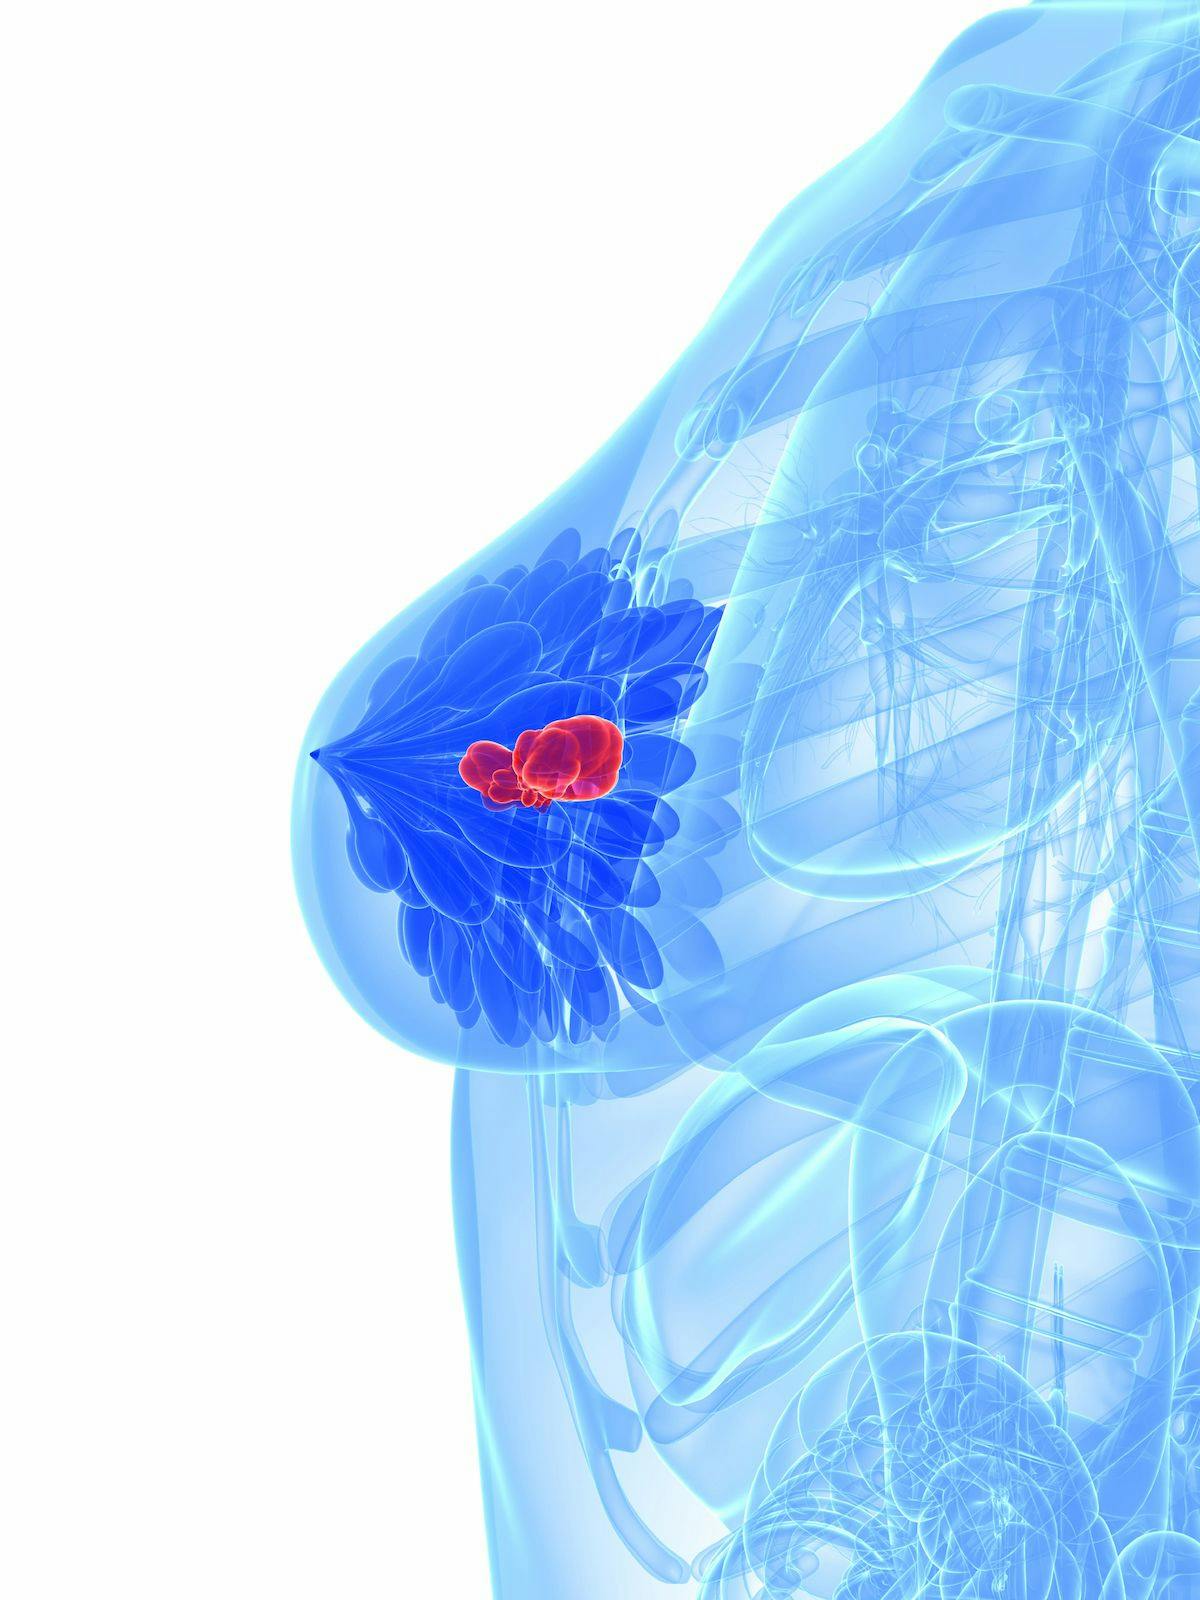 Treatment with an aromatase inhibitor appears to reduce the risk of breast cancer recurrence in patients who are premenopausal and undergoing ovarian suppression vs tamoxifen.